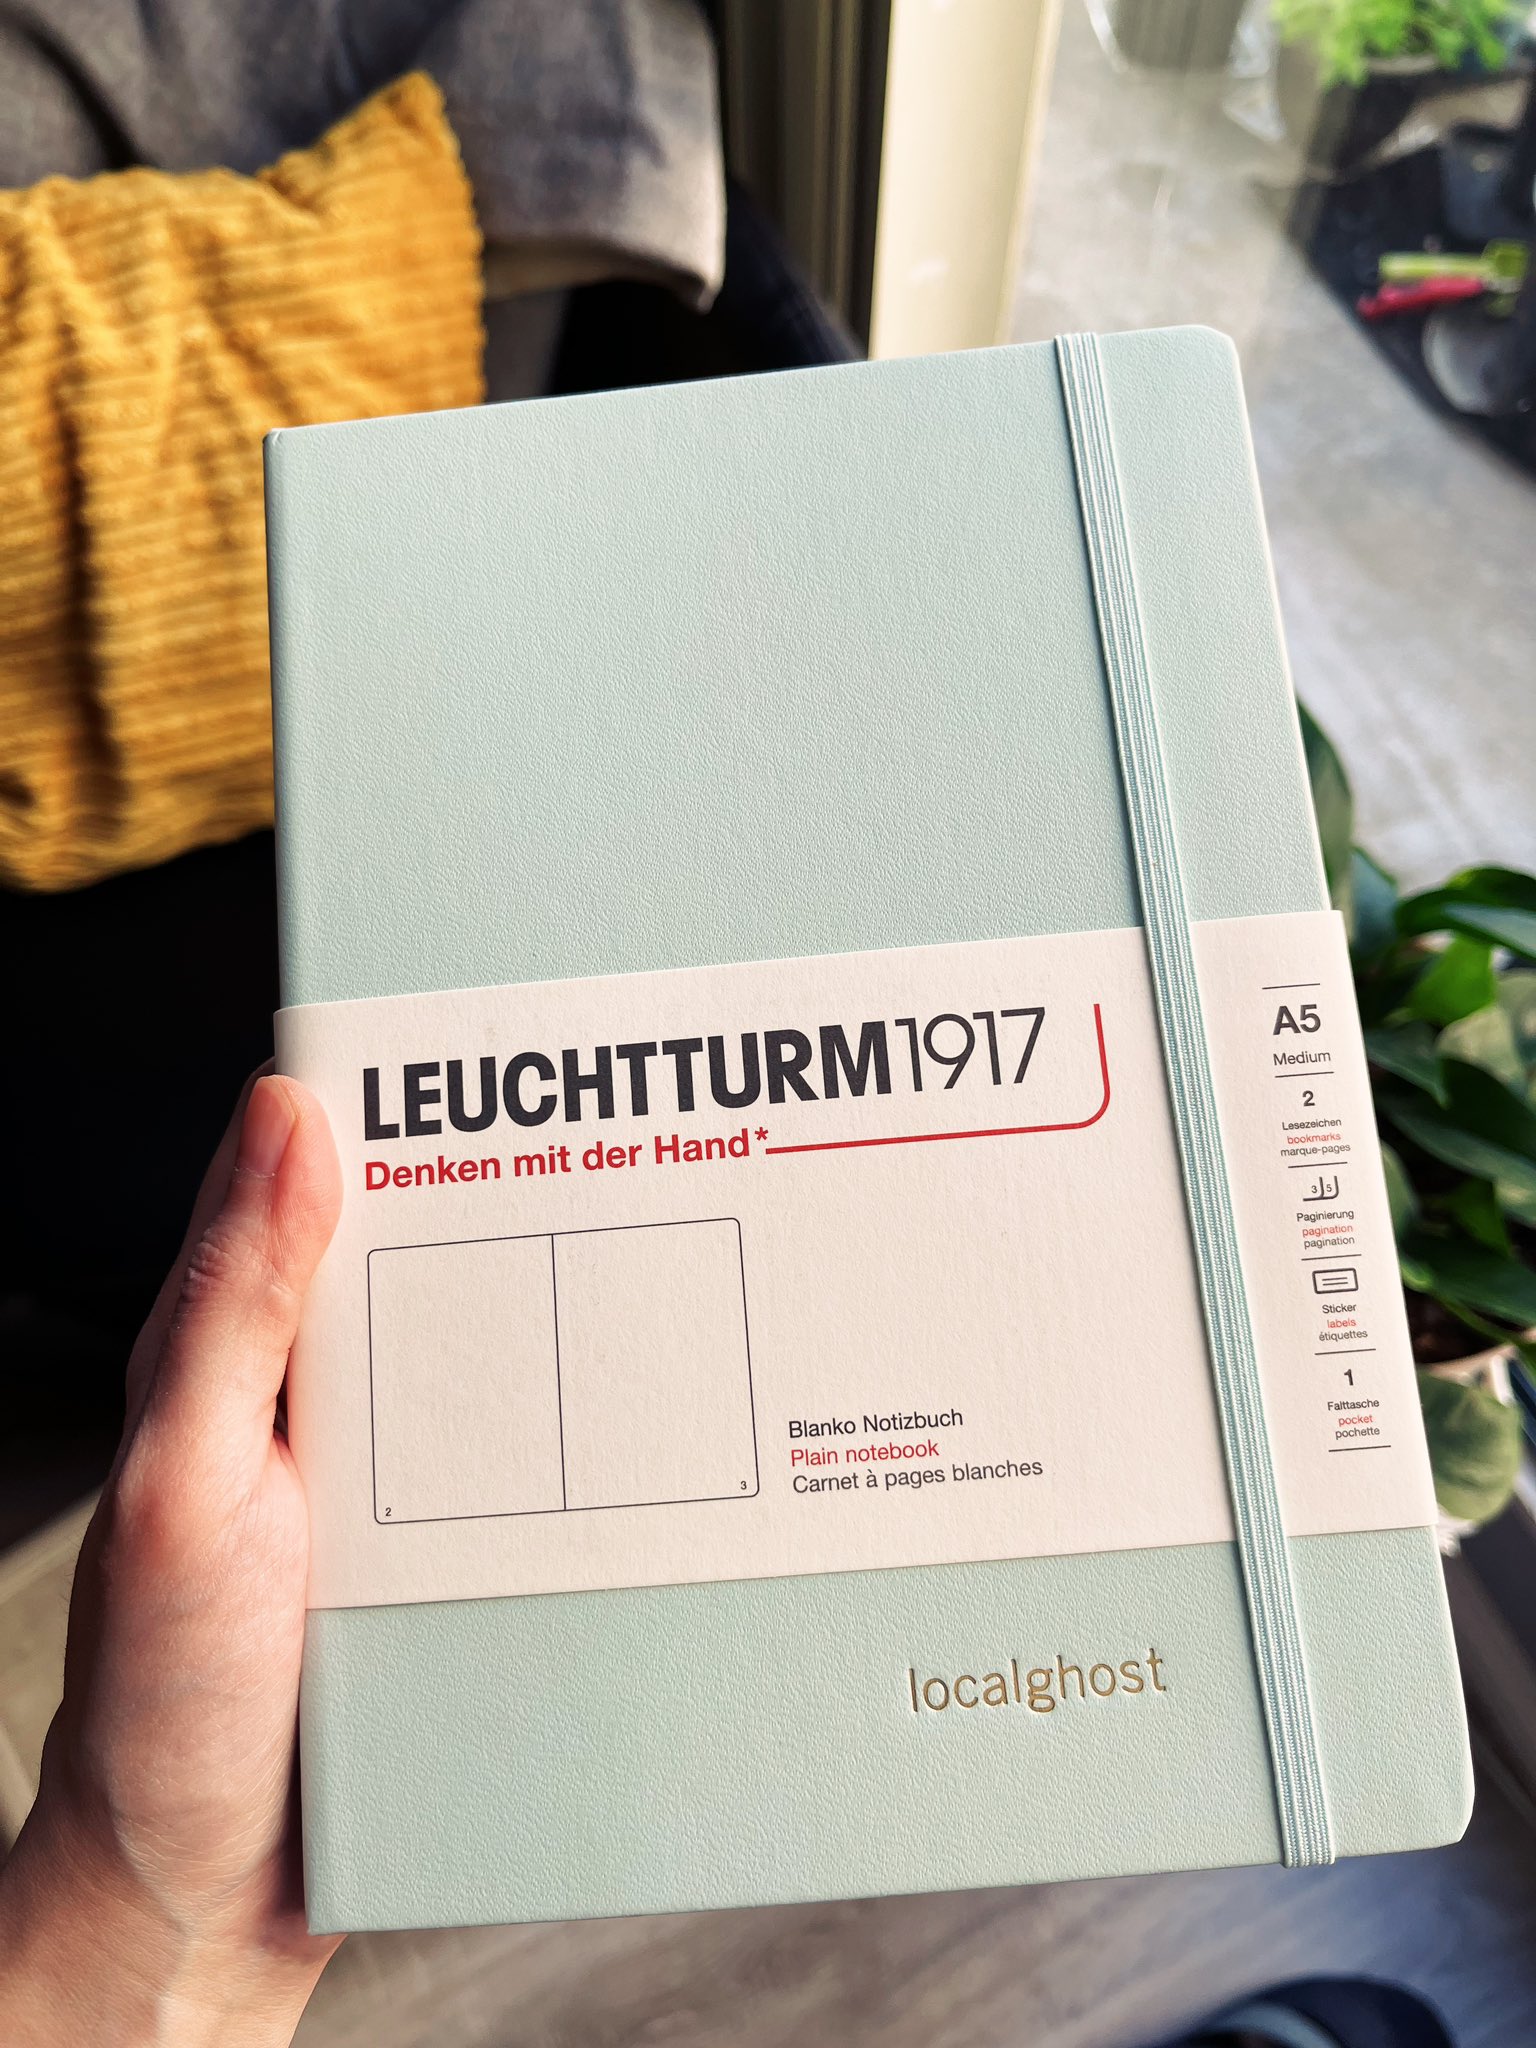 A mint coloured notebook from Leuchtturm 1917 with the word ‘localghost’ embossed on it